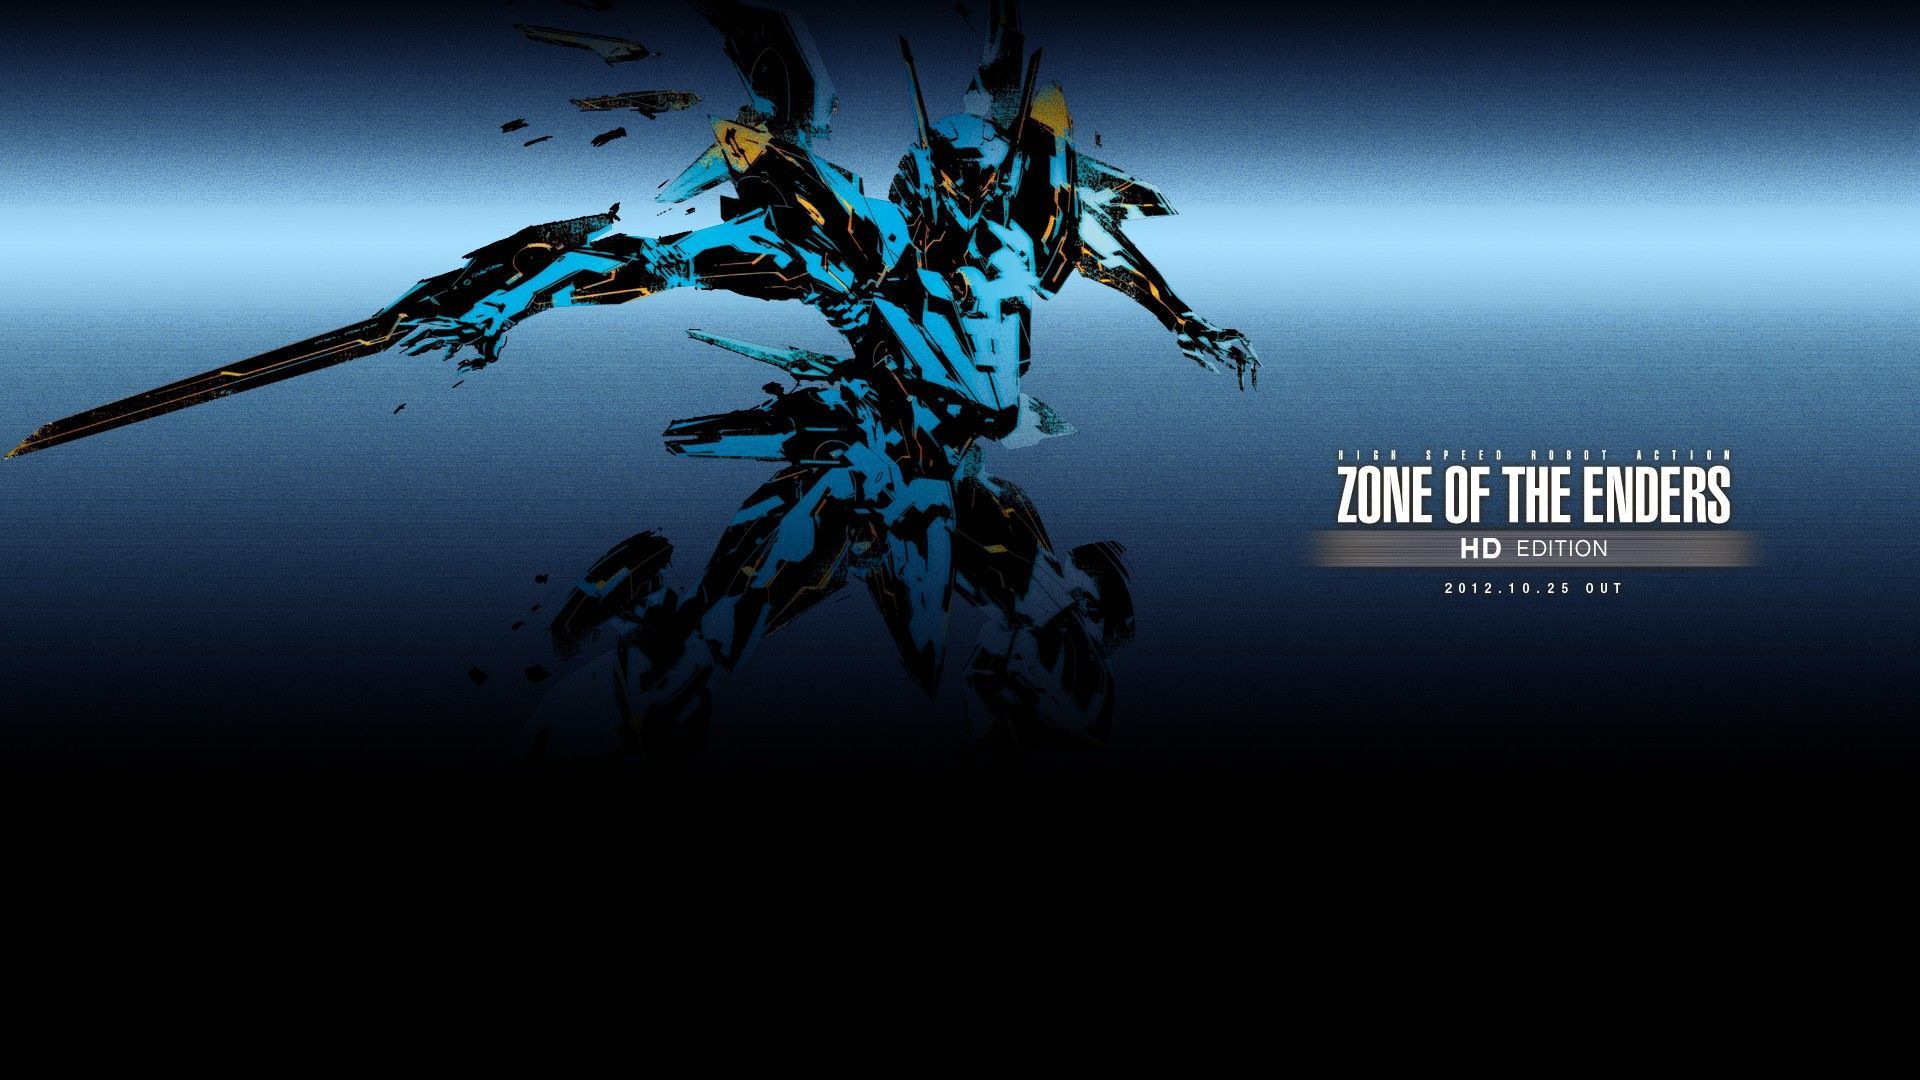 Video games zone of the enders game wallpaper. Zone of the enders, Ender's game, Video games